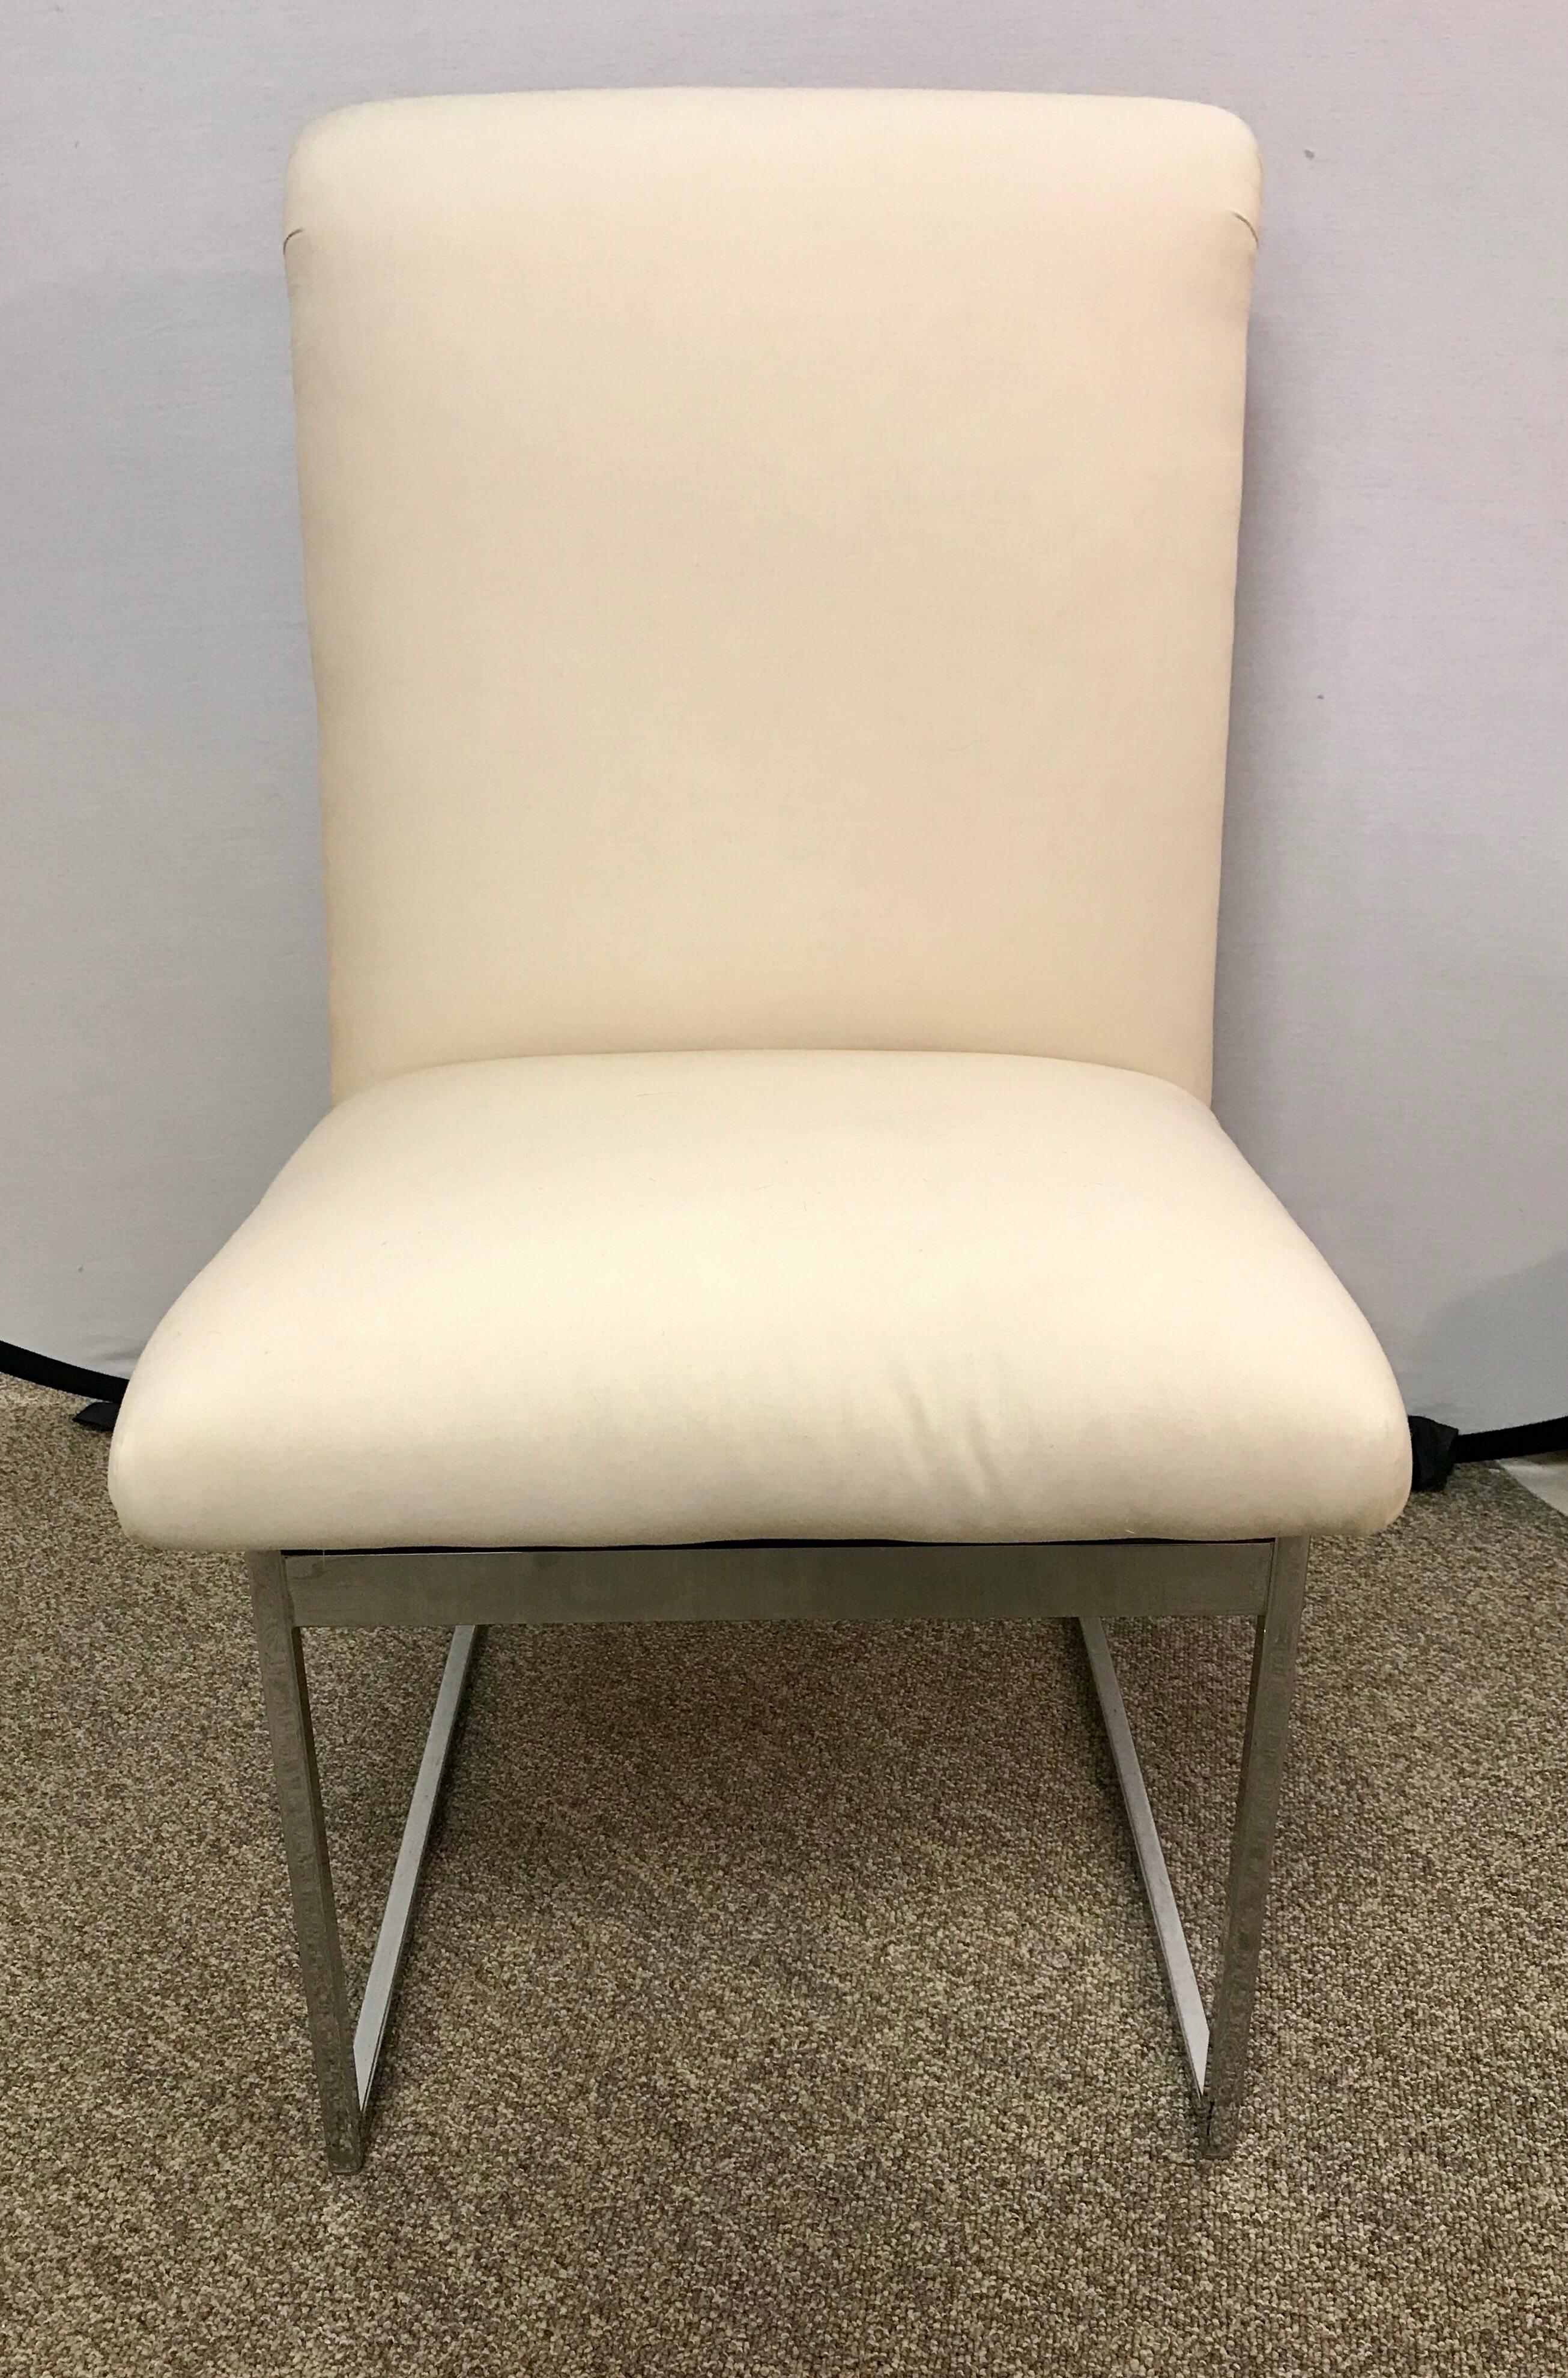 Elegant set of Milo Baughman style midcentury chairs with polished steel and off white newer fabric.